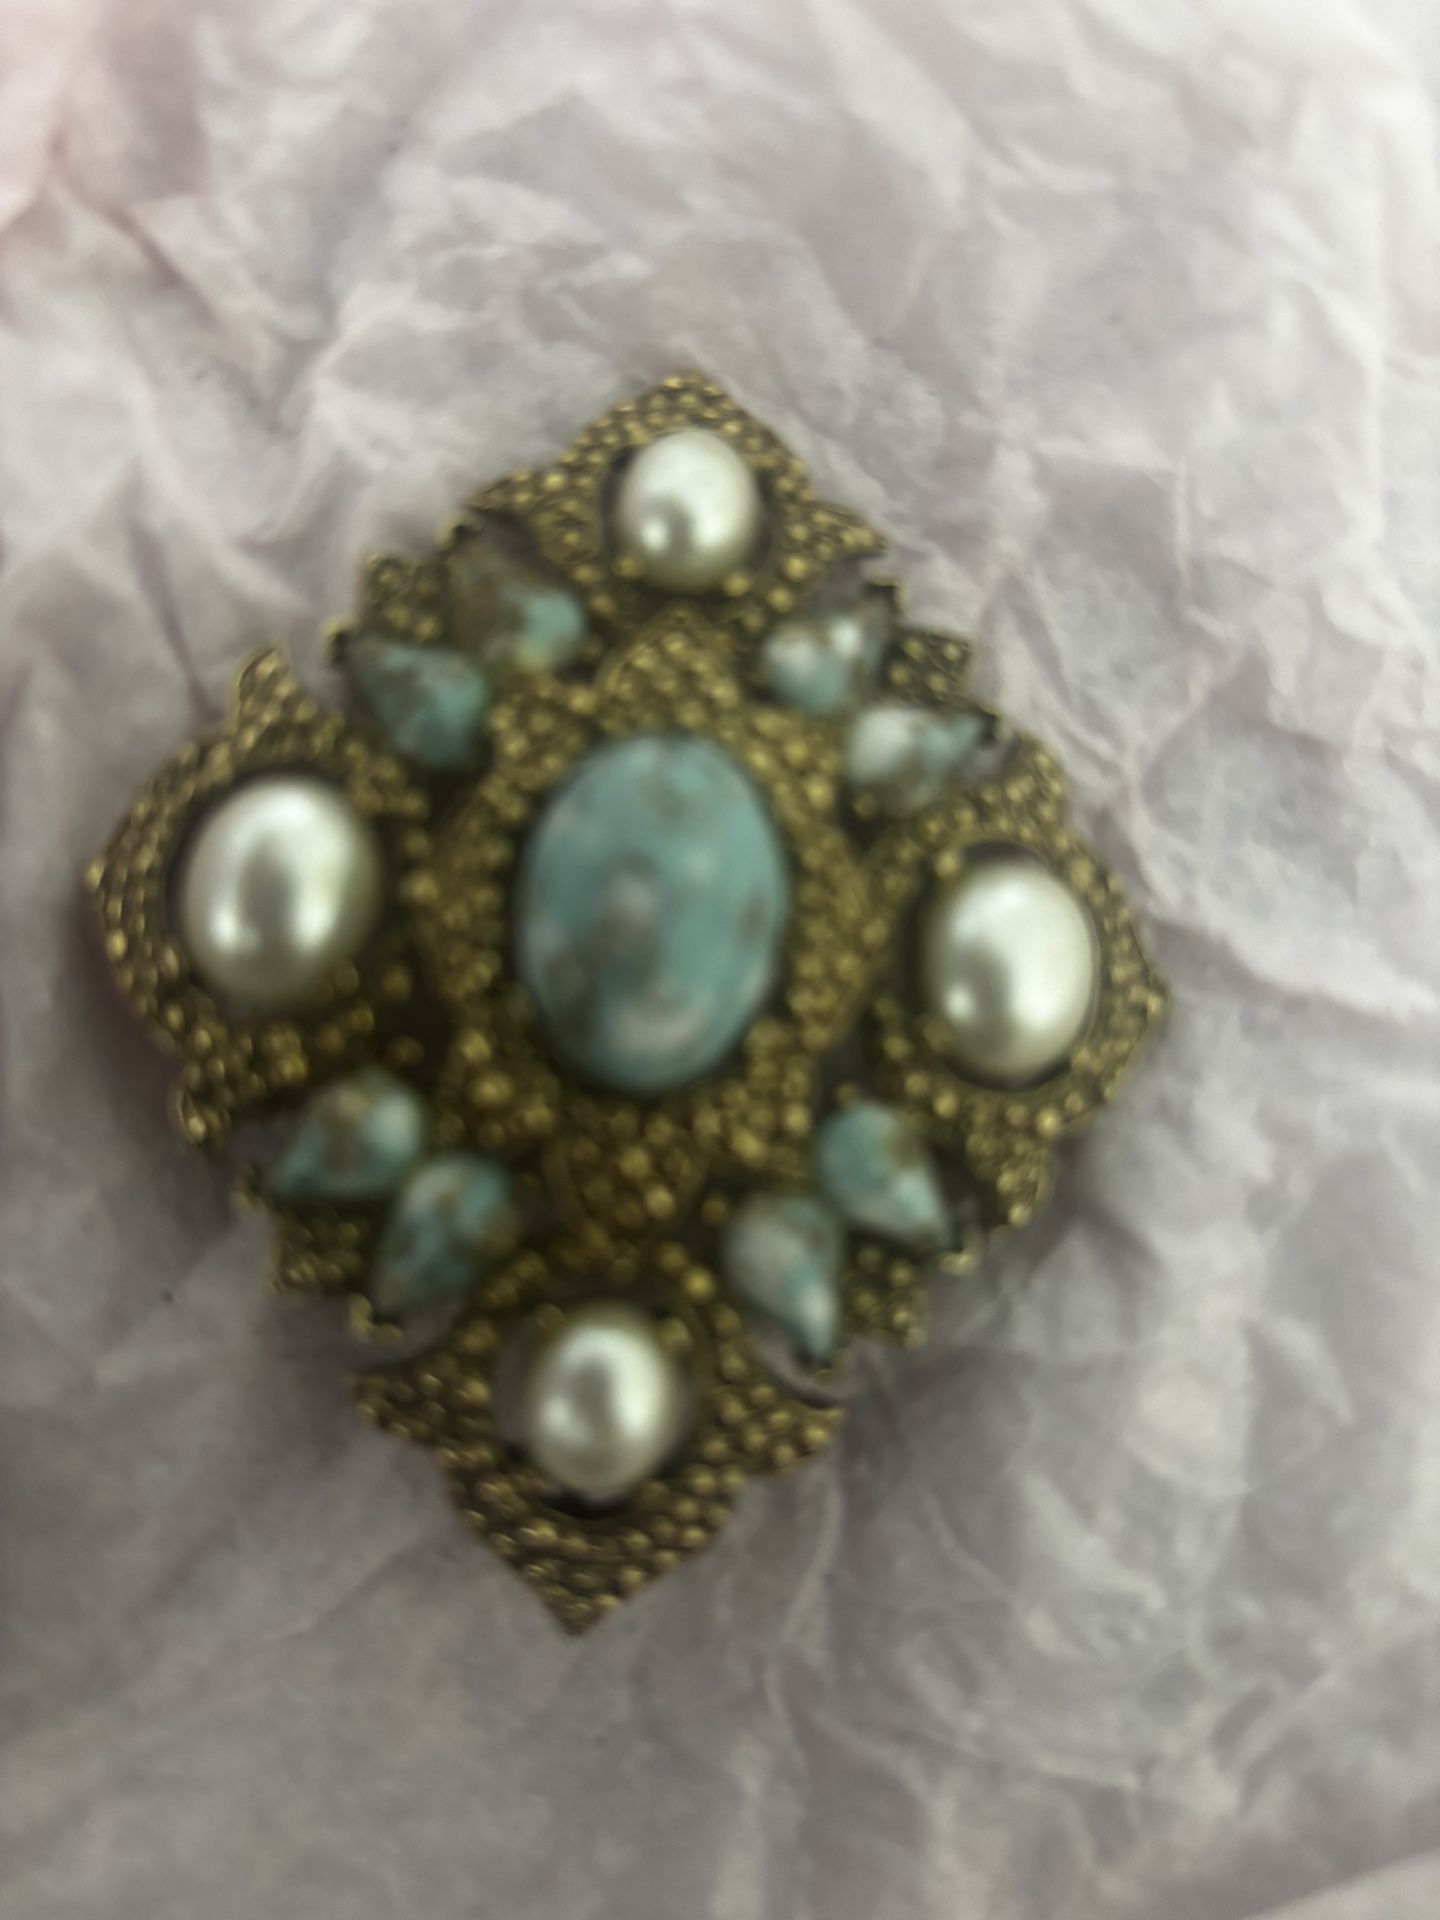 Vintage 1968 Sarah Coventry Remembrance Brooch accessory pendant gem pin stones 